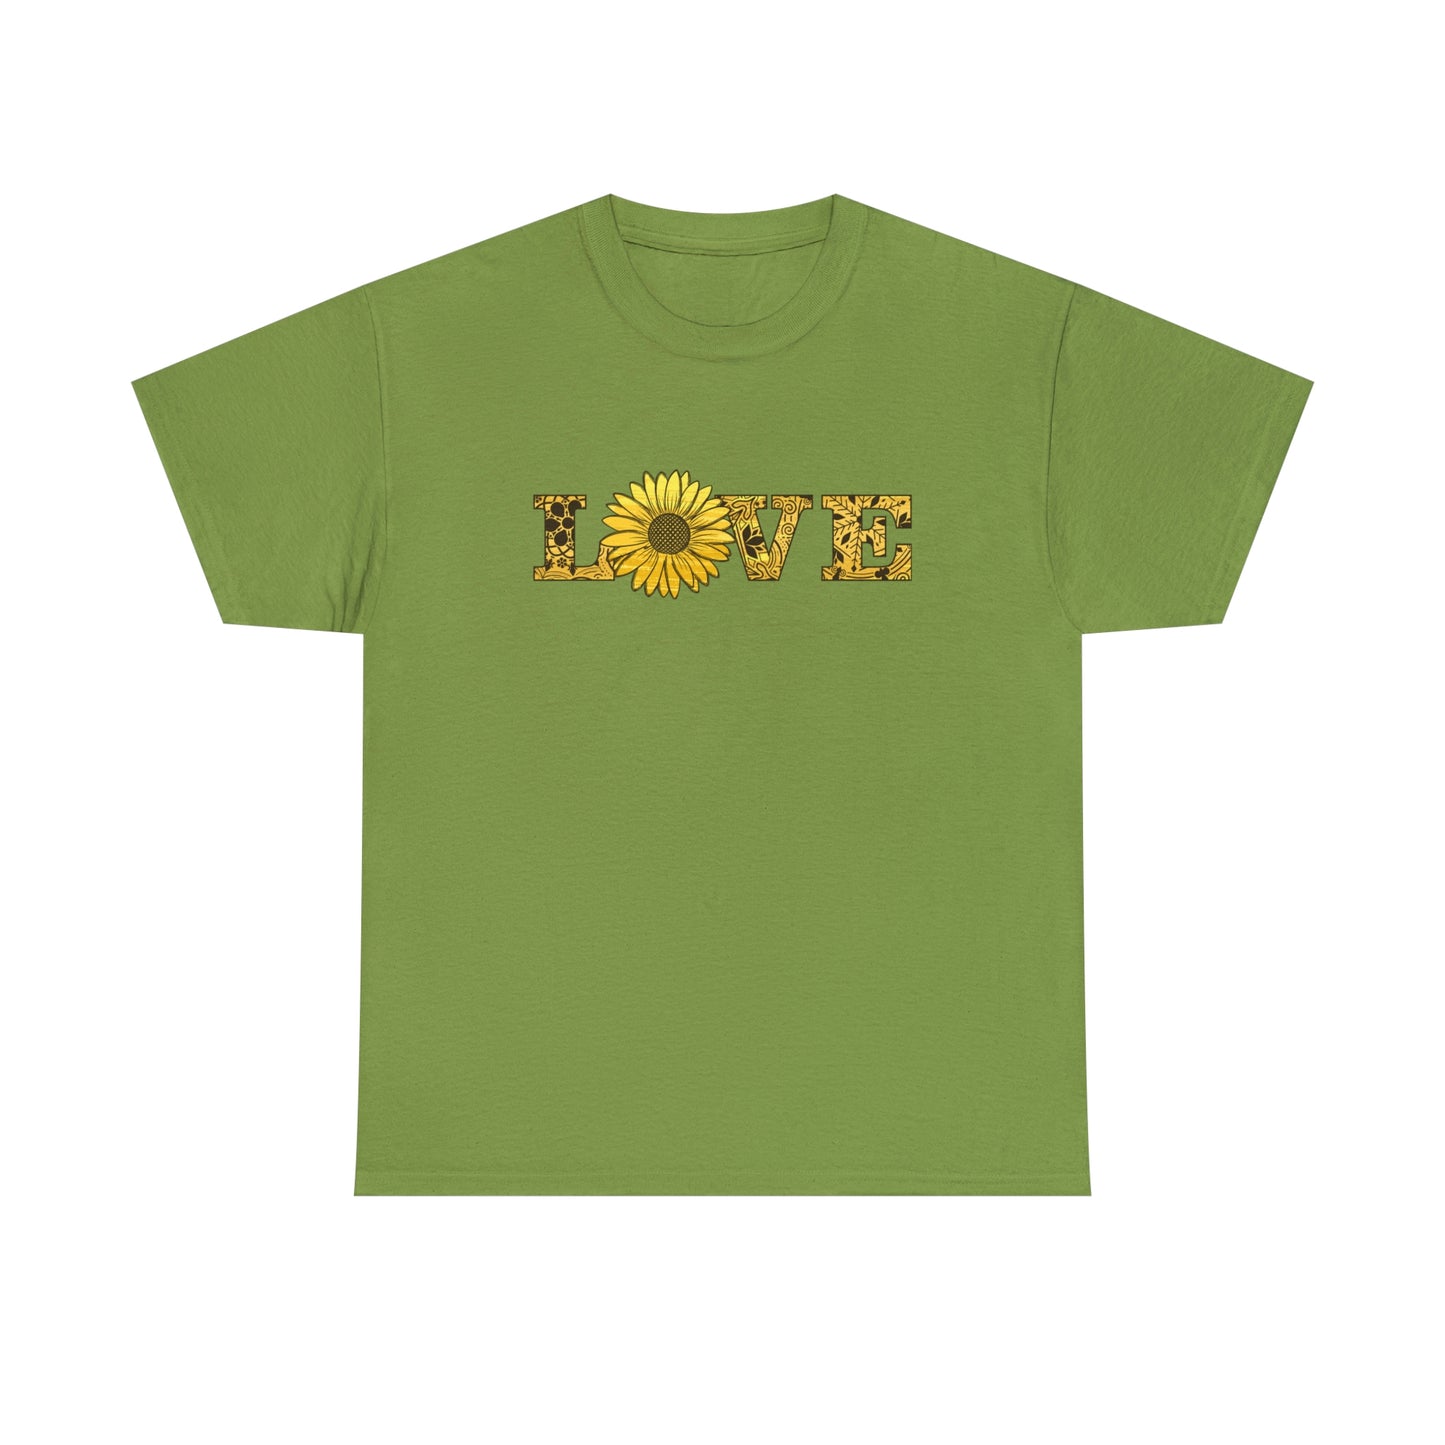 Sunflower T-Shirt For Woman TShirt With Love Graphic T Shirt With Floral Pattern Shirt With Fall Flower TShirt For Garden T Shirt Women's Fall Shirt